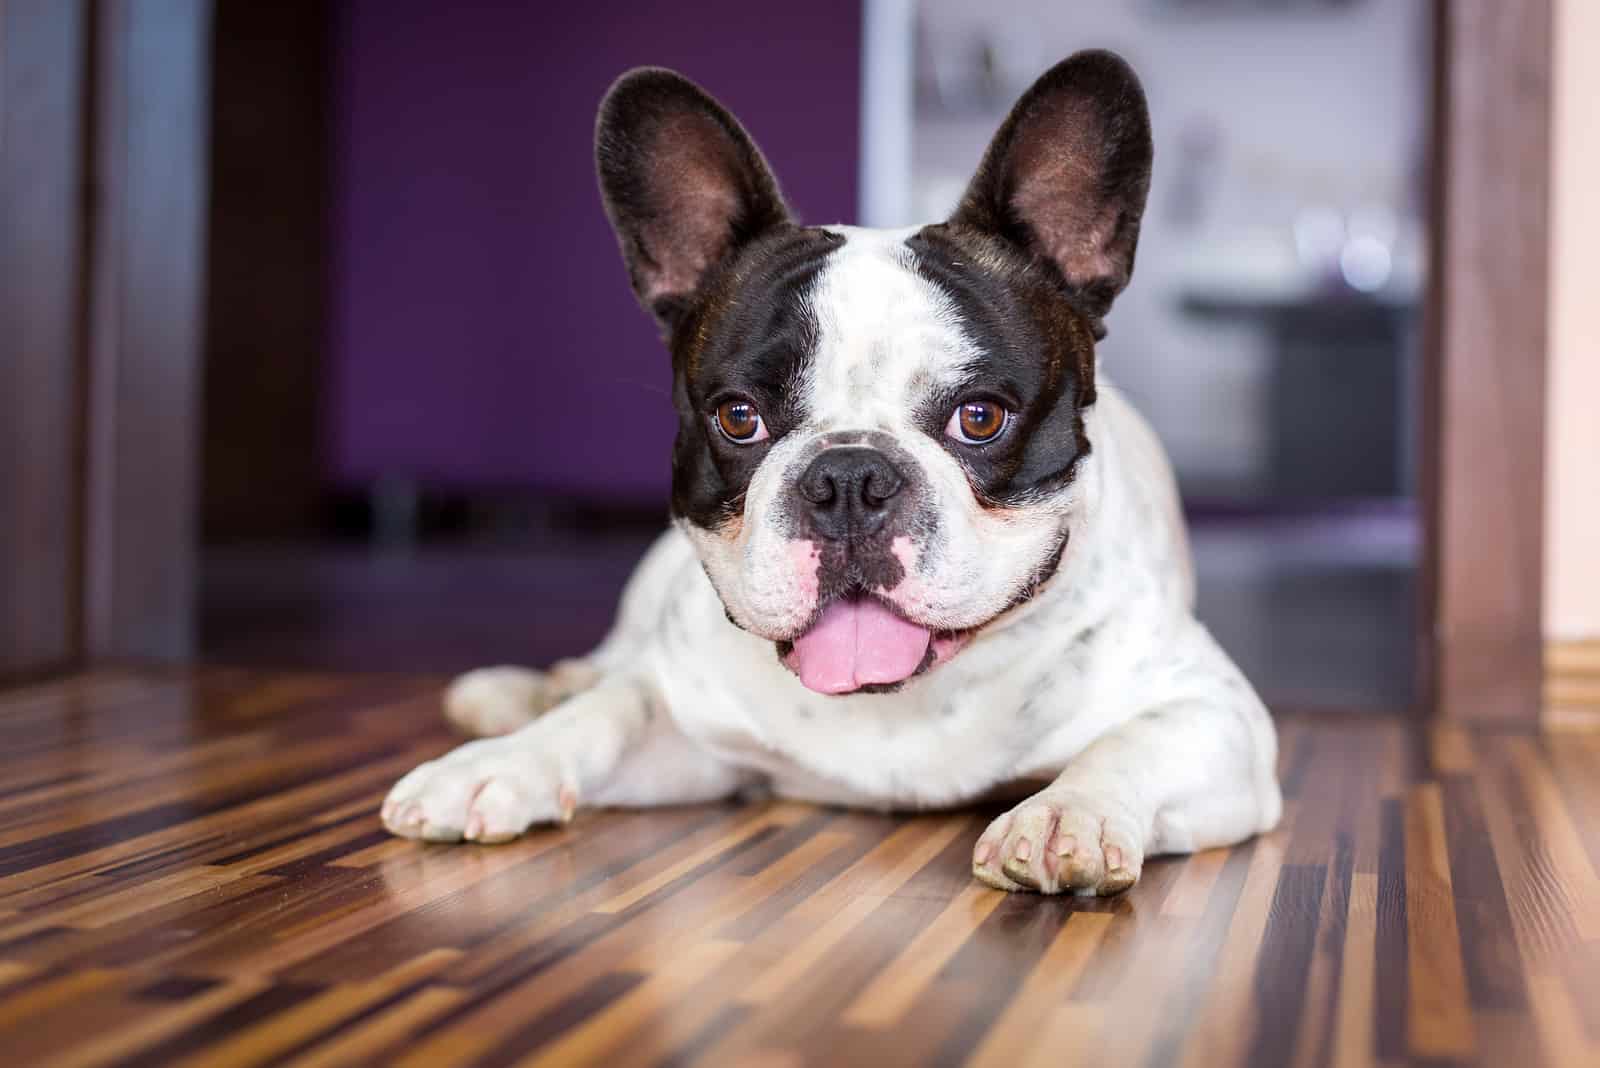 French bulldog lying down tired after walk